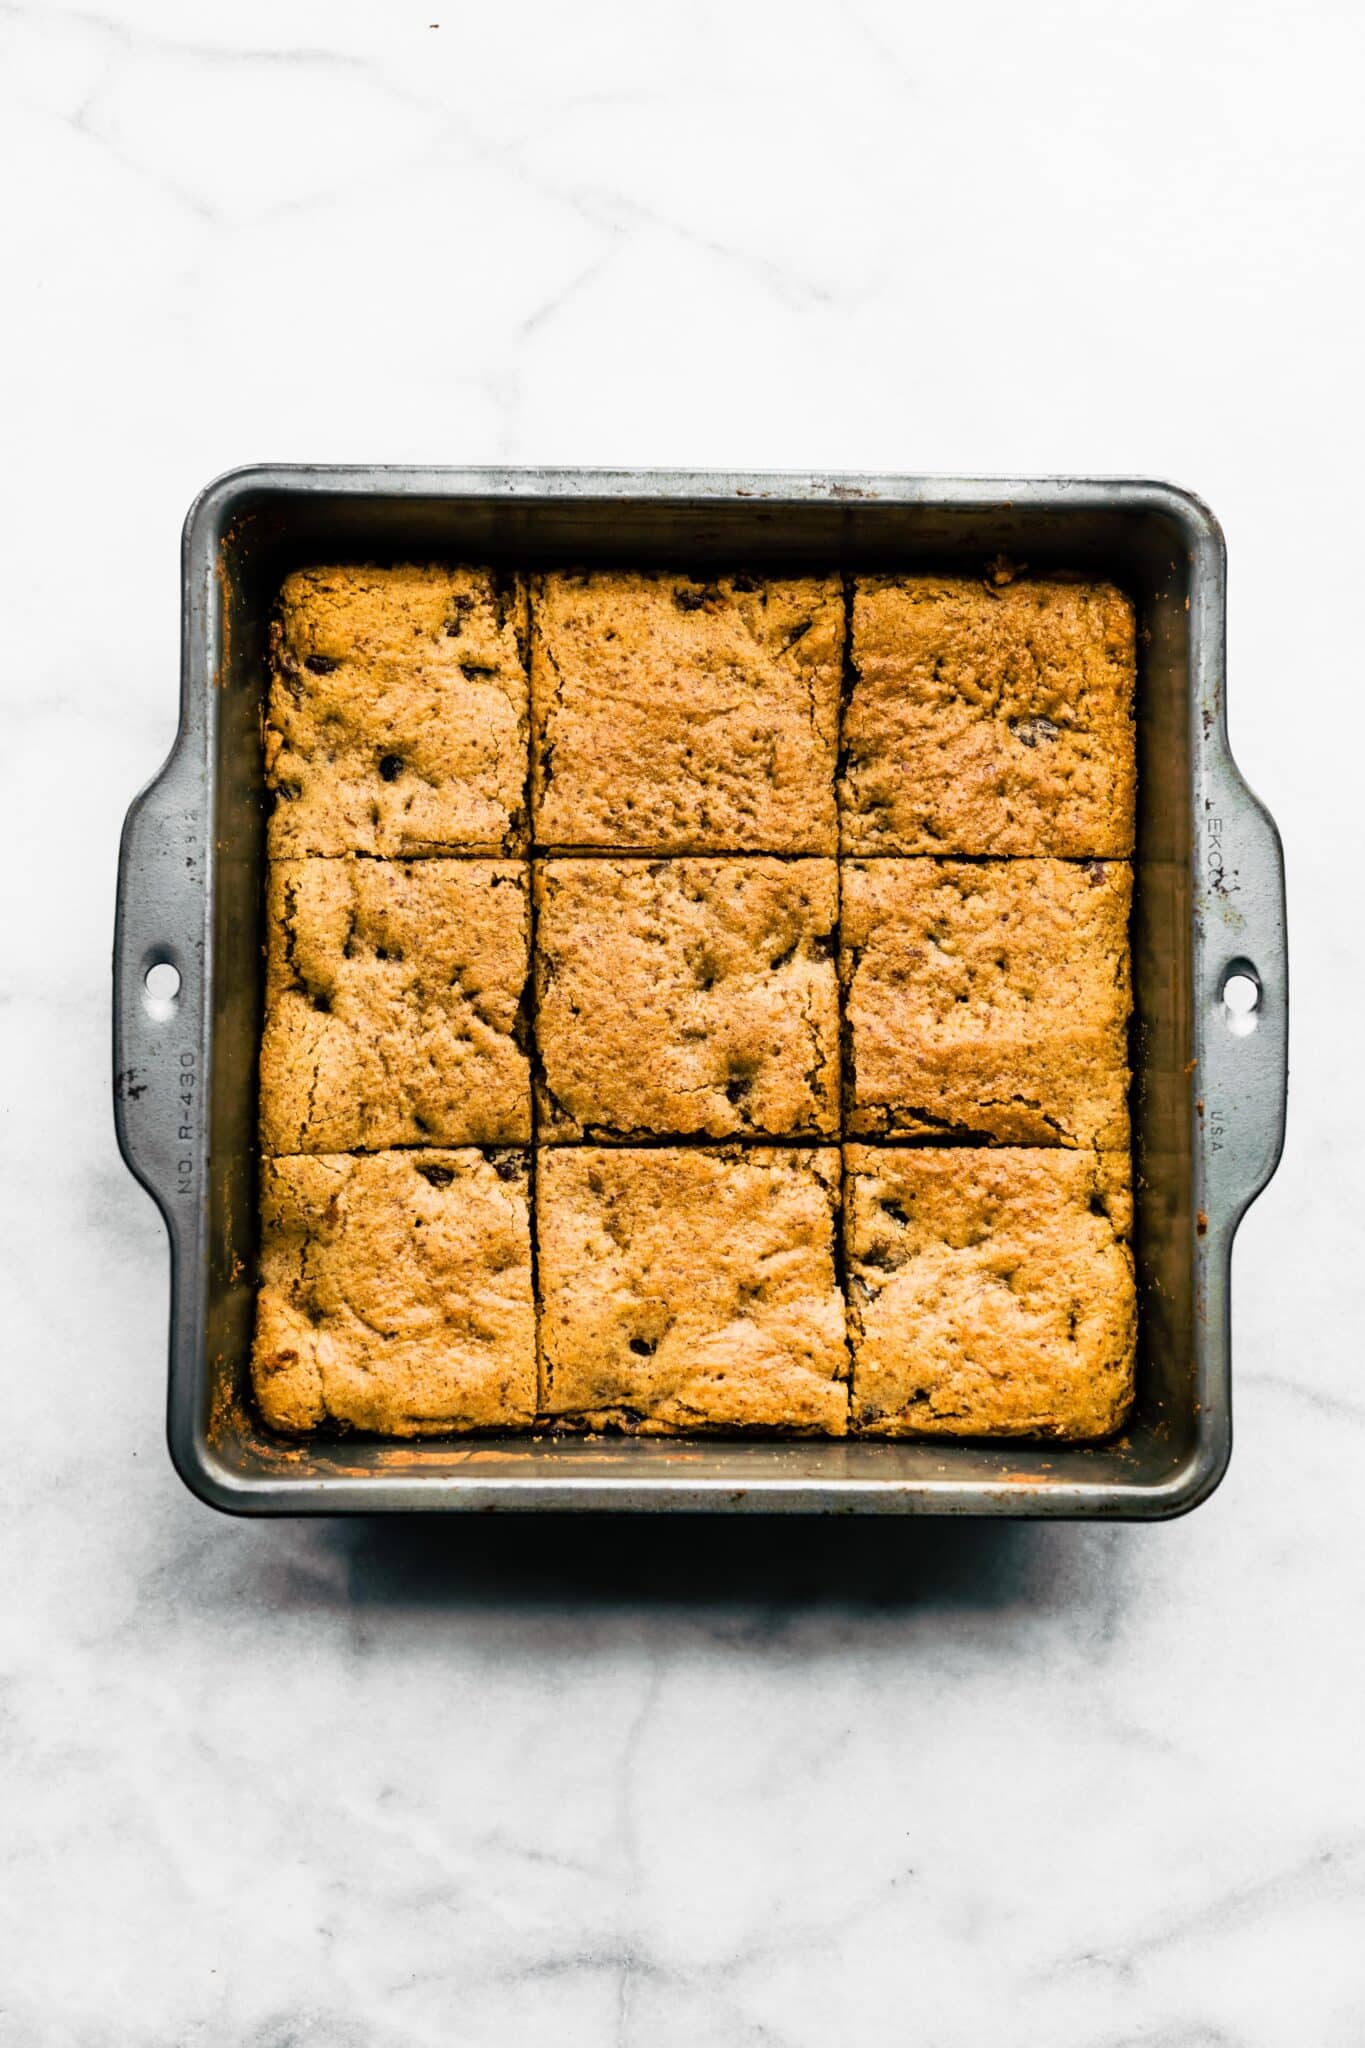 A pan of Soft Baked Paleo bars cut into squares in a metal pan.